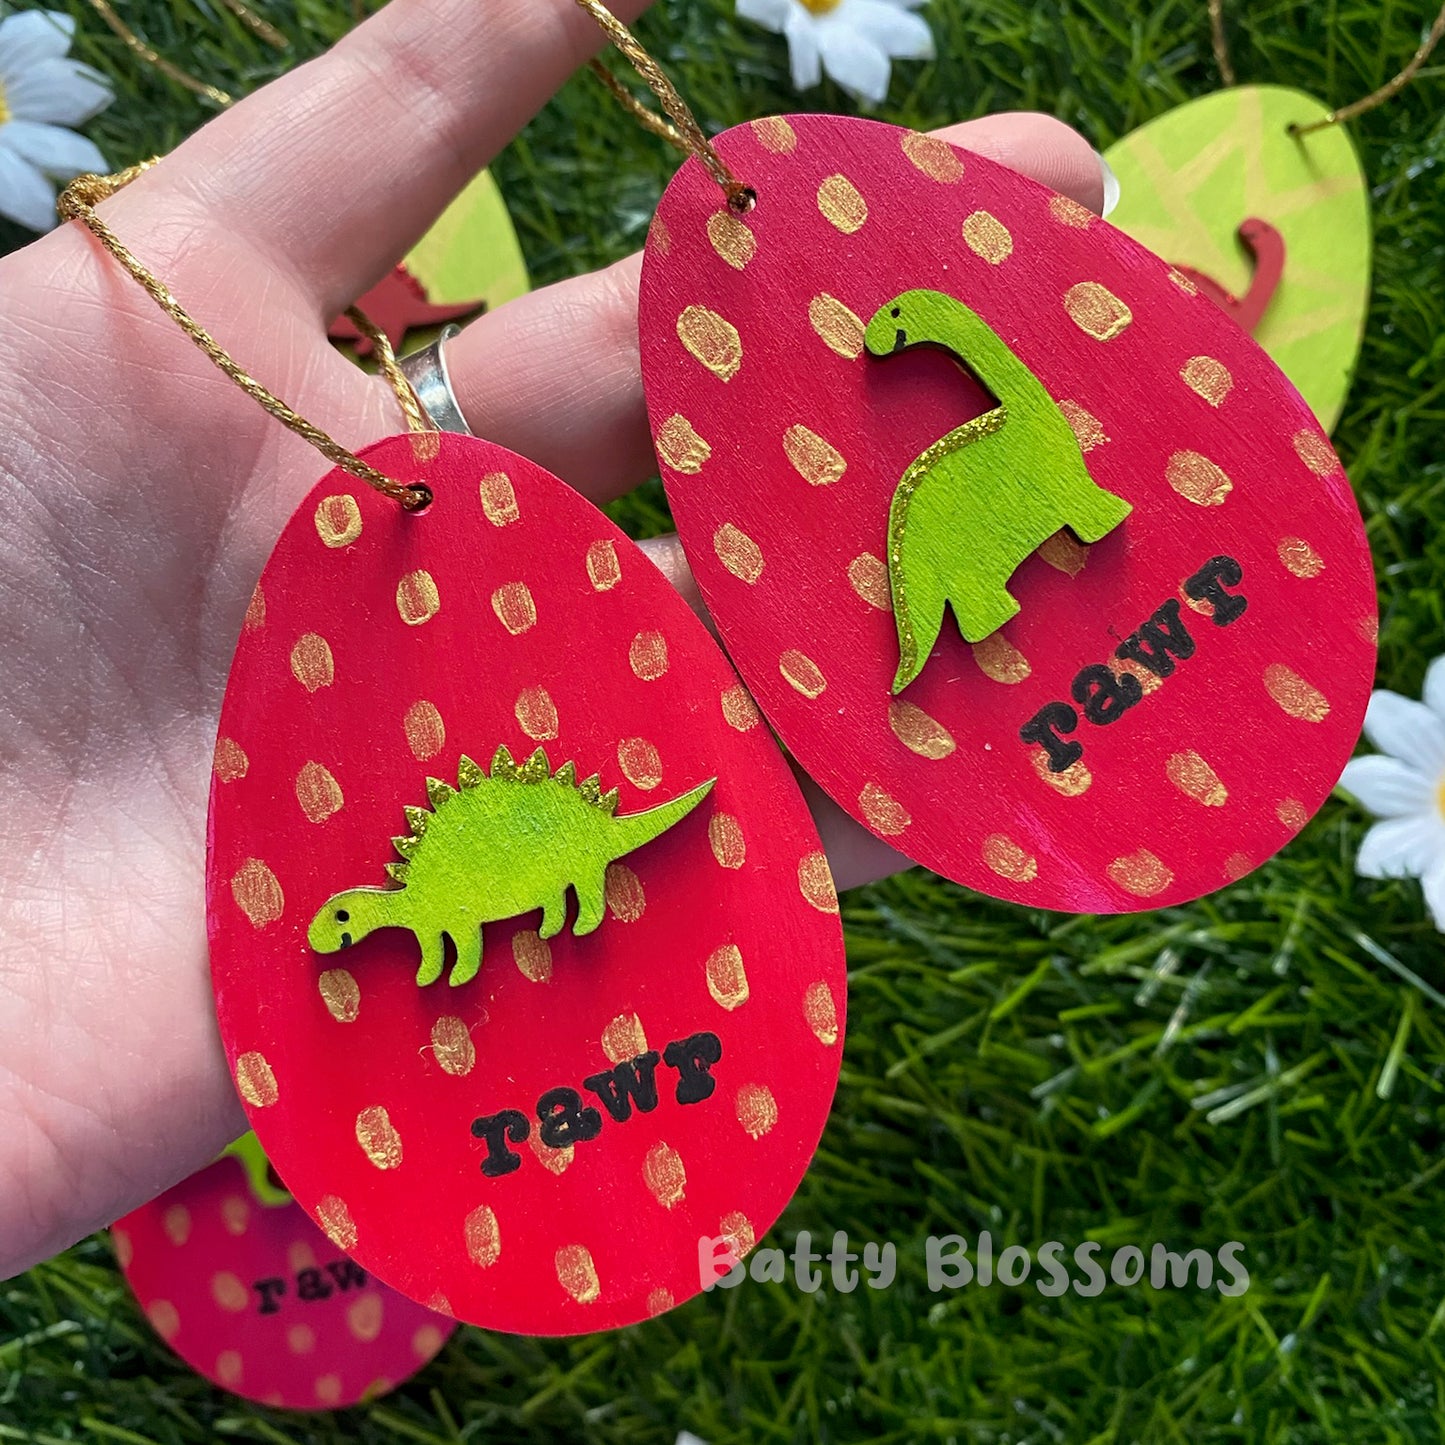 Dino Easter Egg wooden decorations